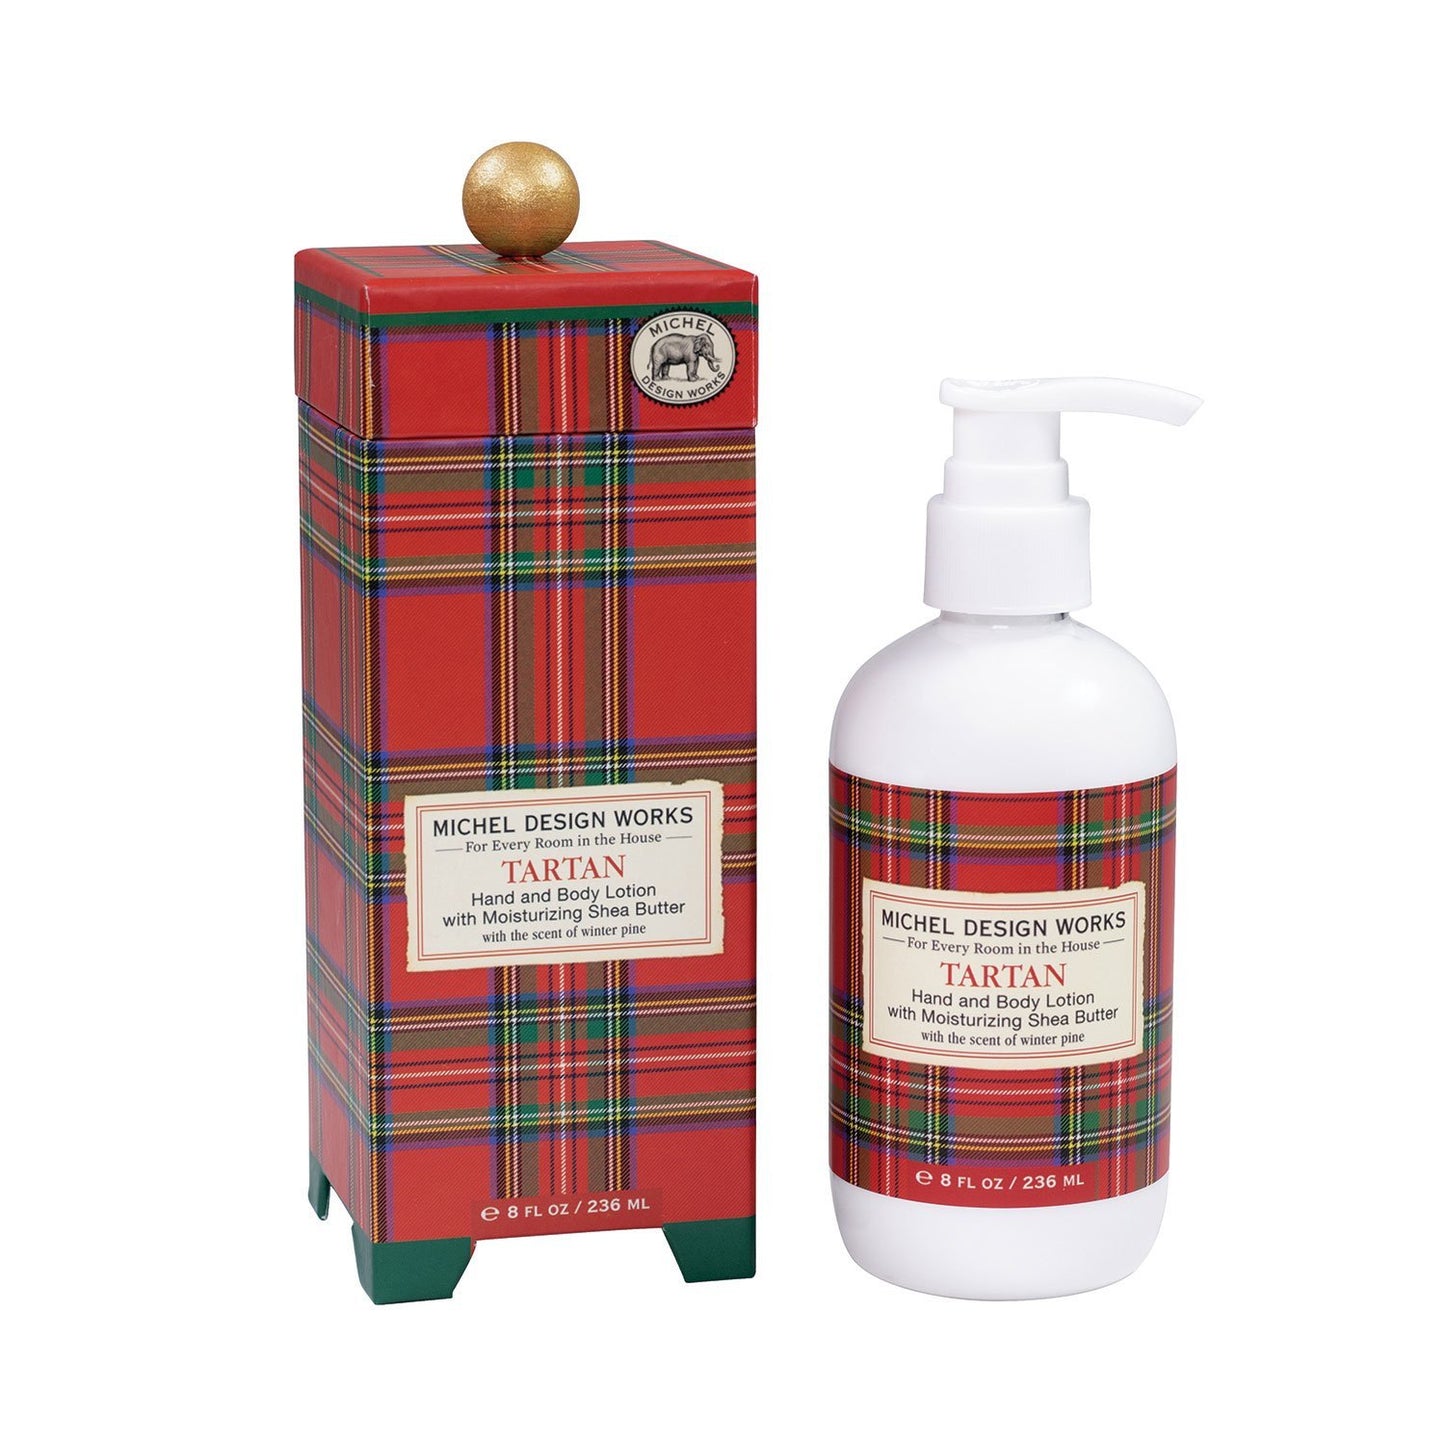 Tartan Lotion Luxurious Hand and Body Elixir with Winter Pine Fragrance